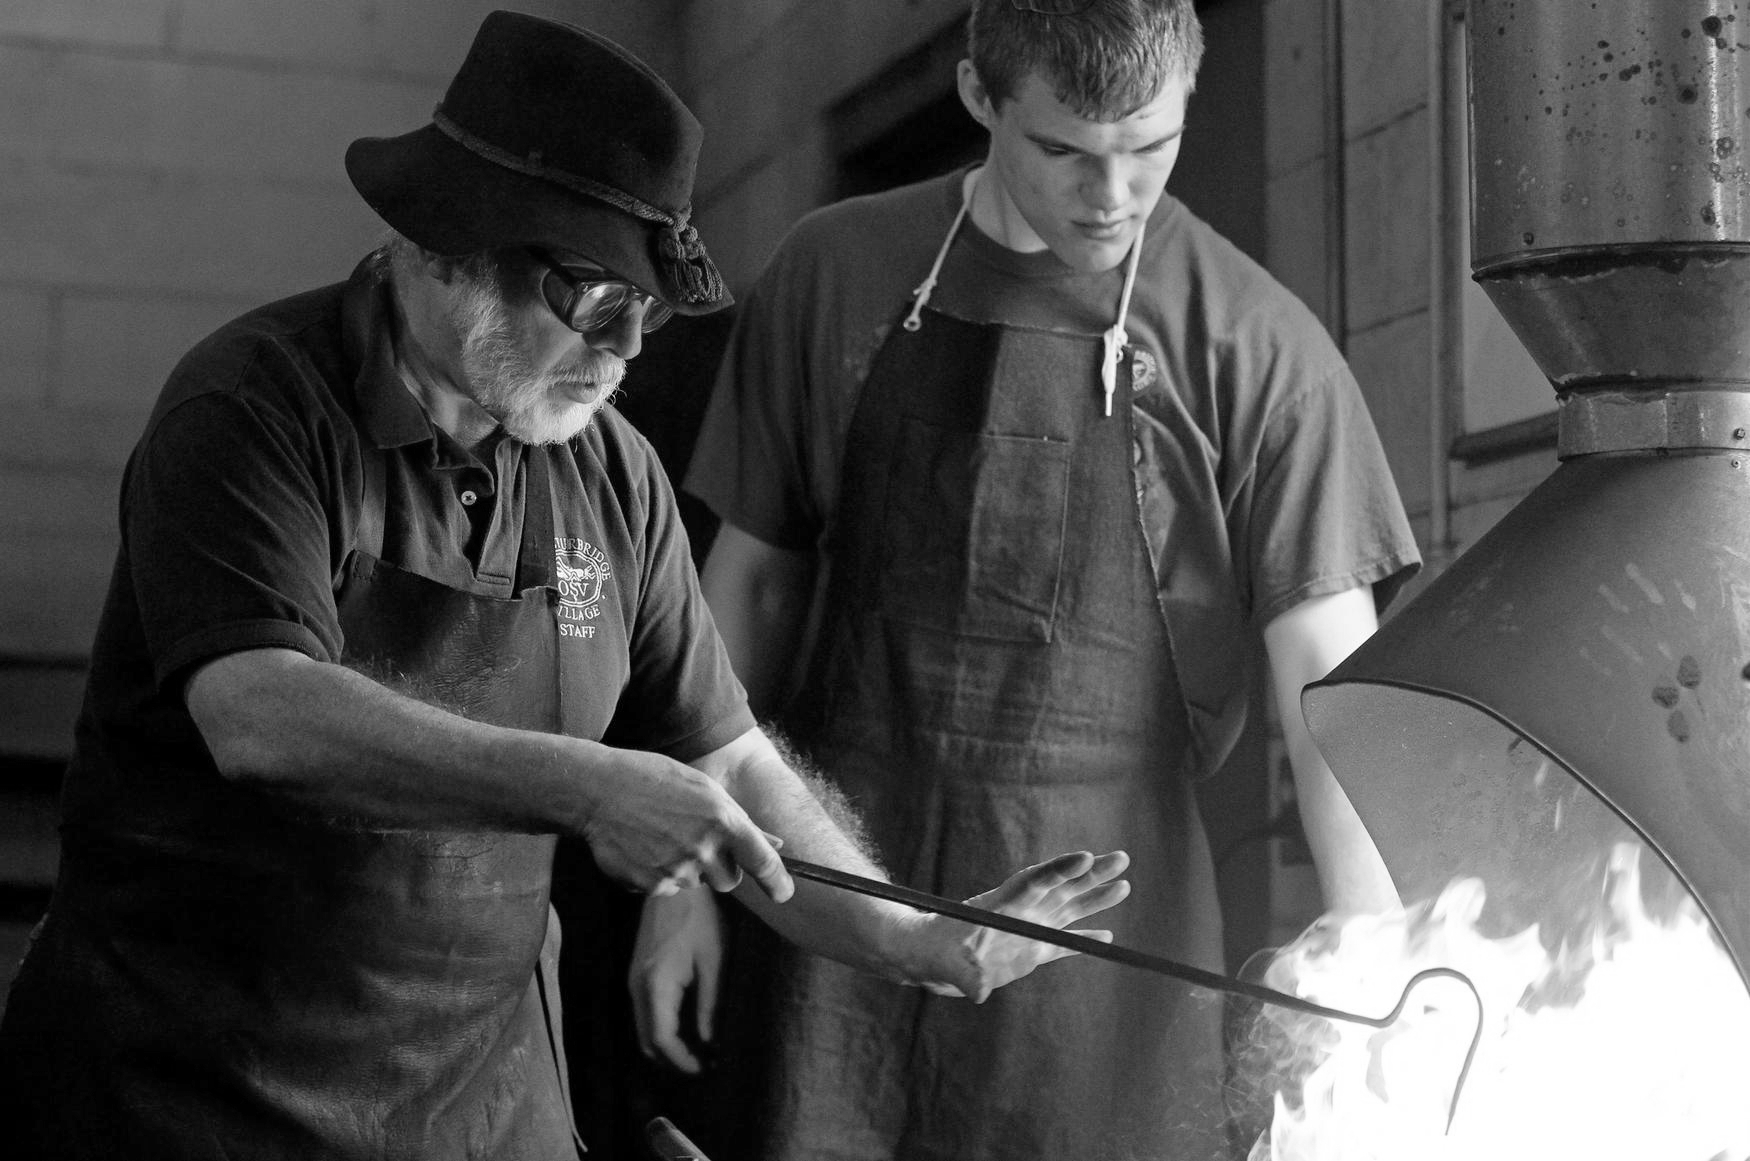 A BLACKSMITH CHANGES A LIFE IN A SINGLE MOMENT